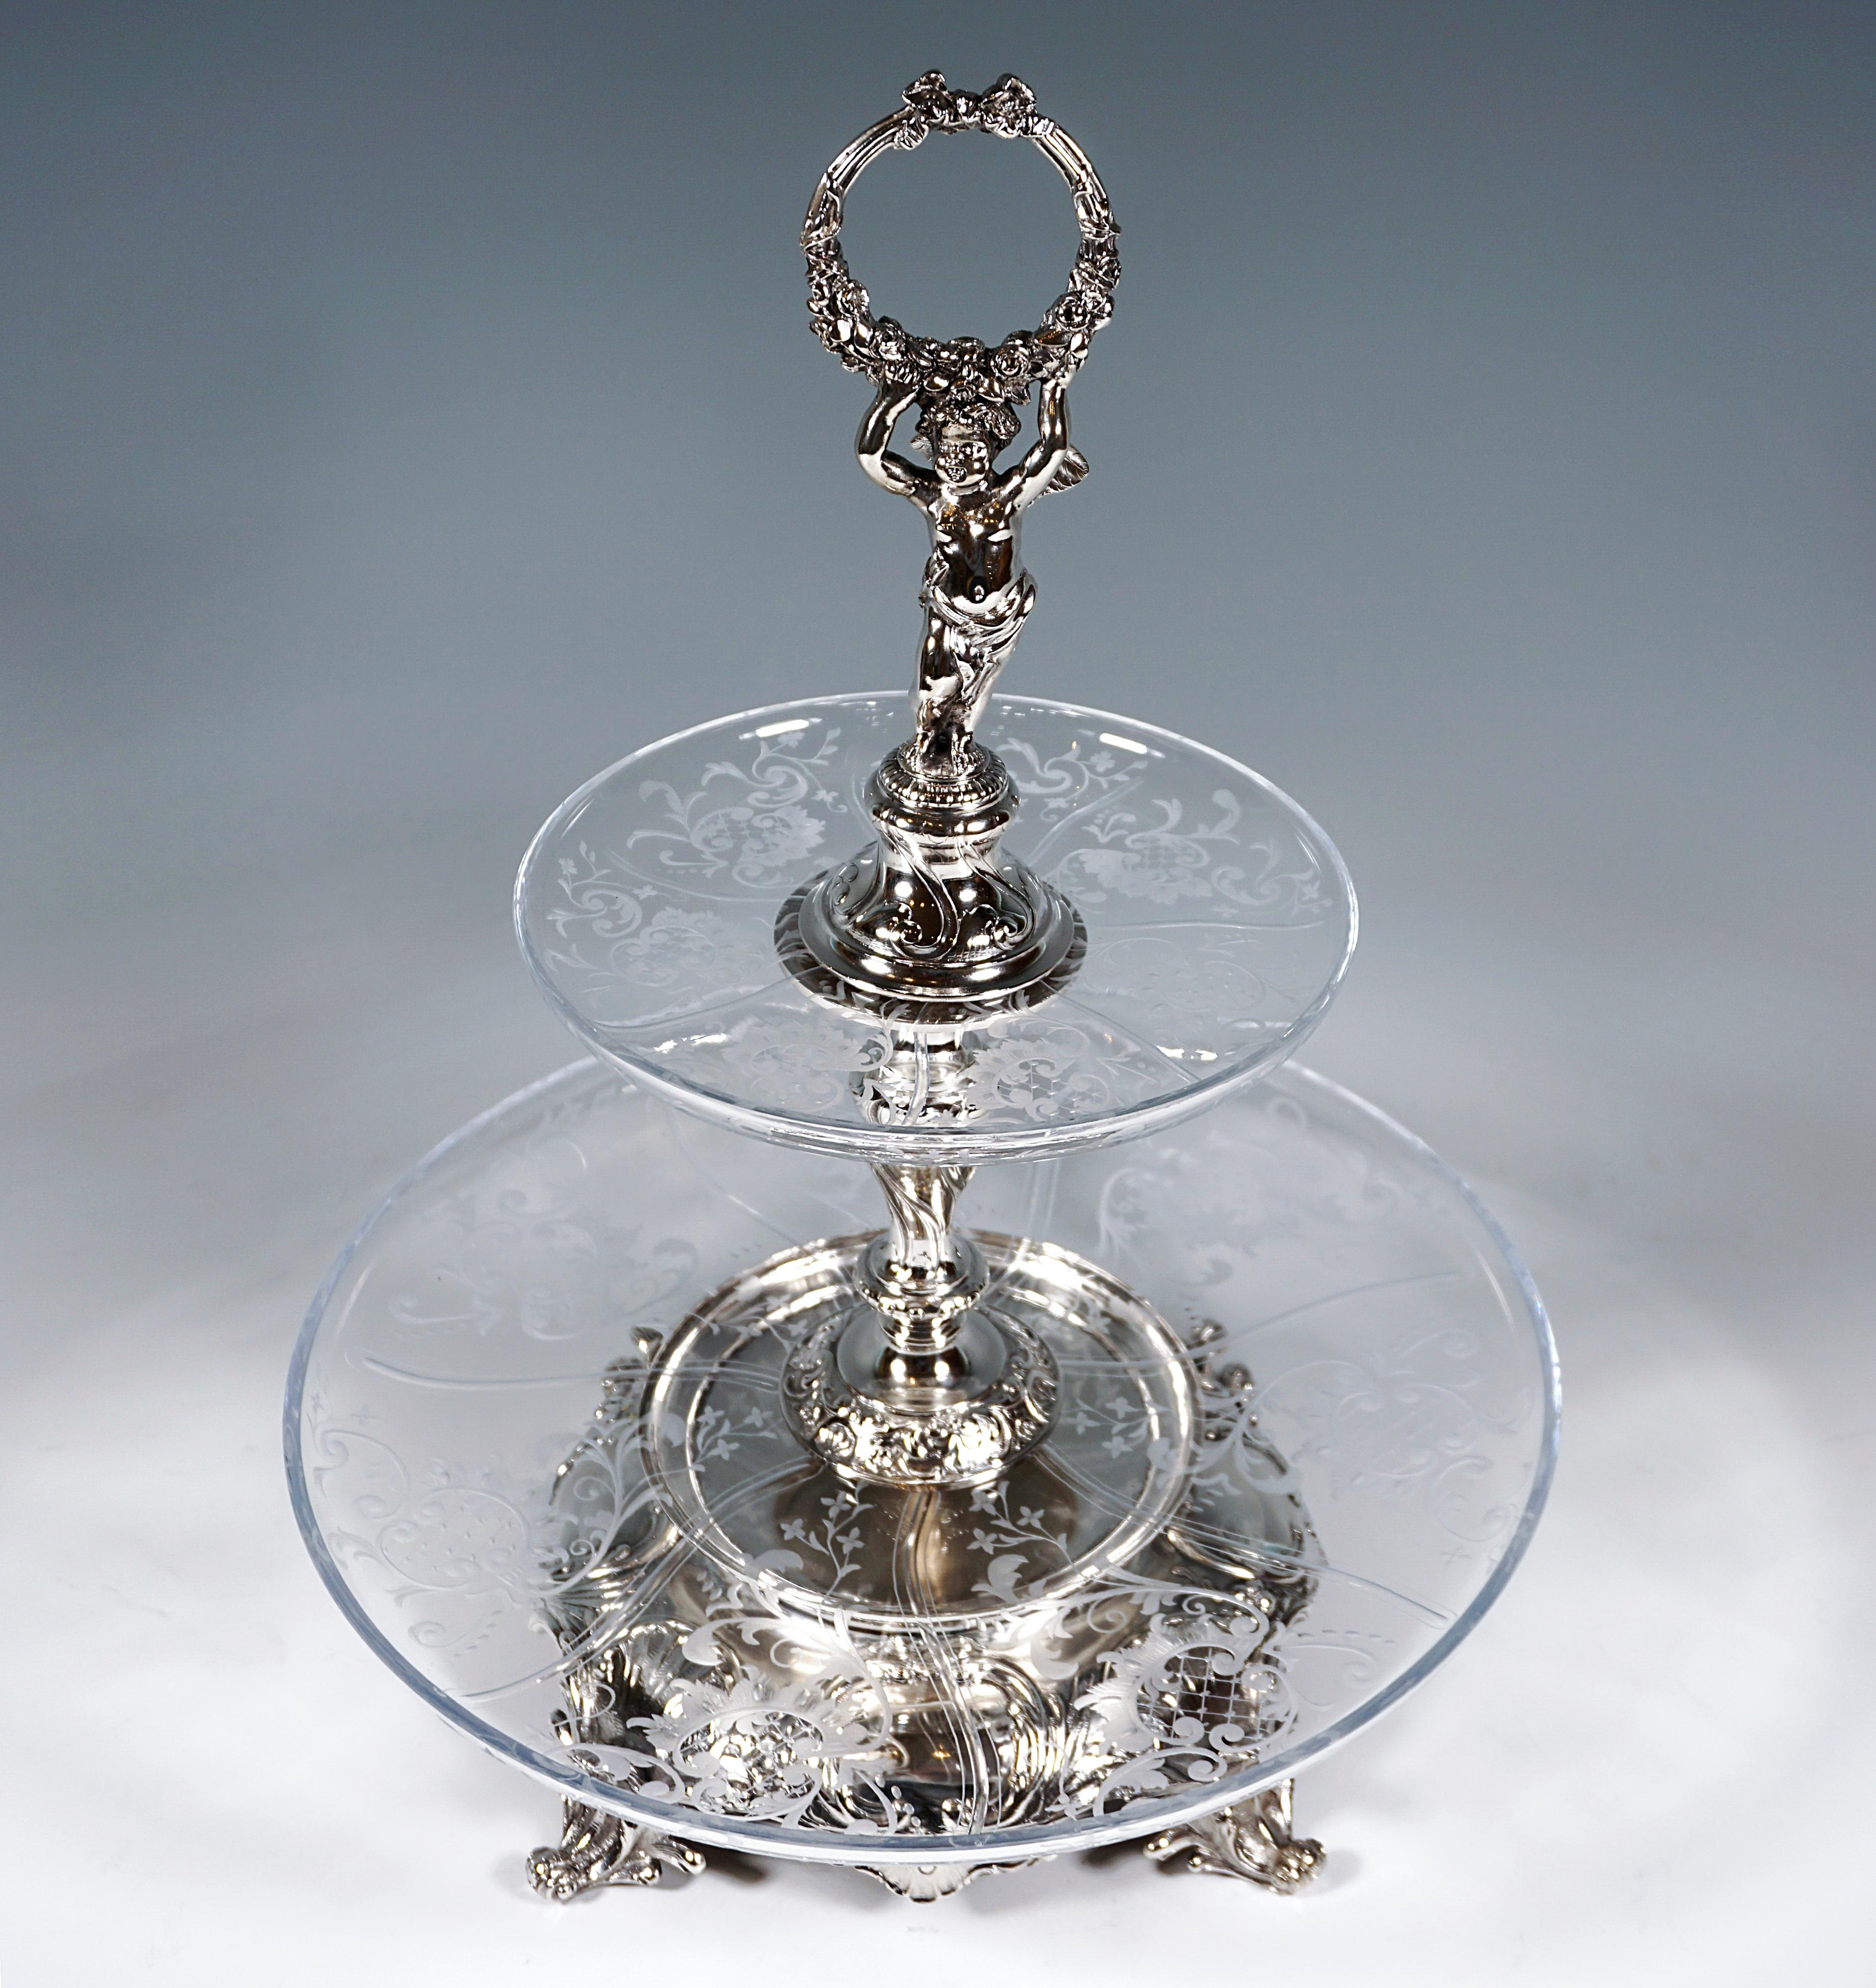 Excellent original Viennese Art Nouveau centerpiece:
Two-tiered, silver table étagère on a large, domed stand richly decorated with volutes and panels on four rocaille feet, baluster-shaped shaft, crowned by a fully sculpted, winged putto on a